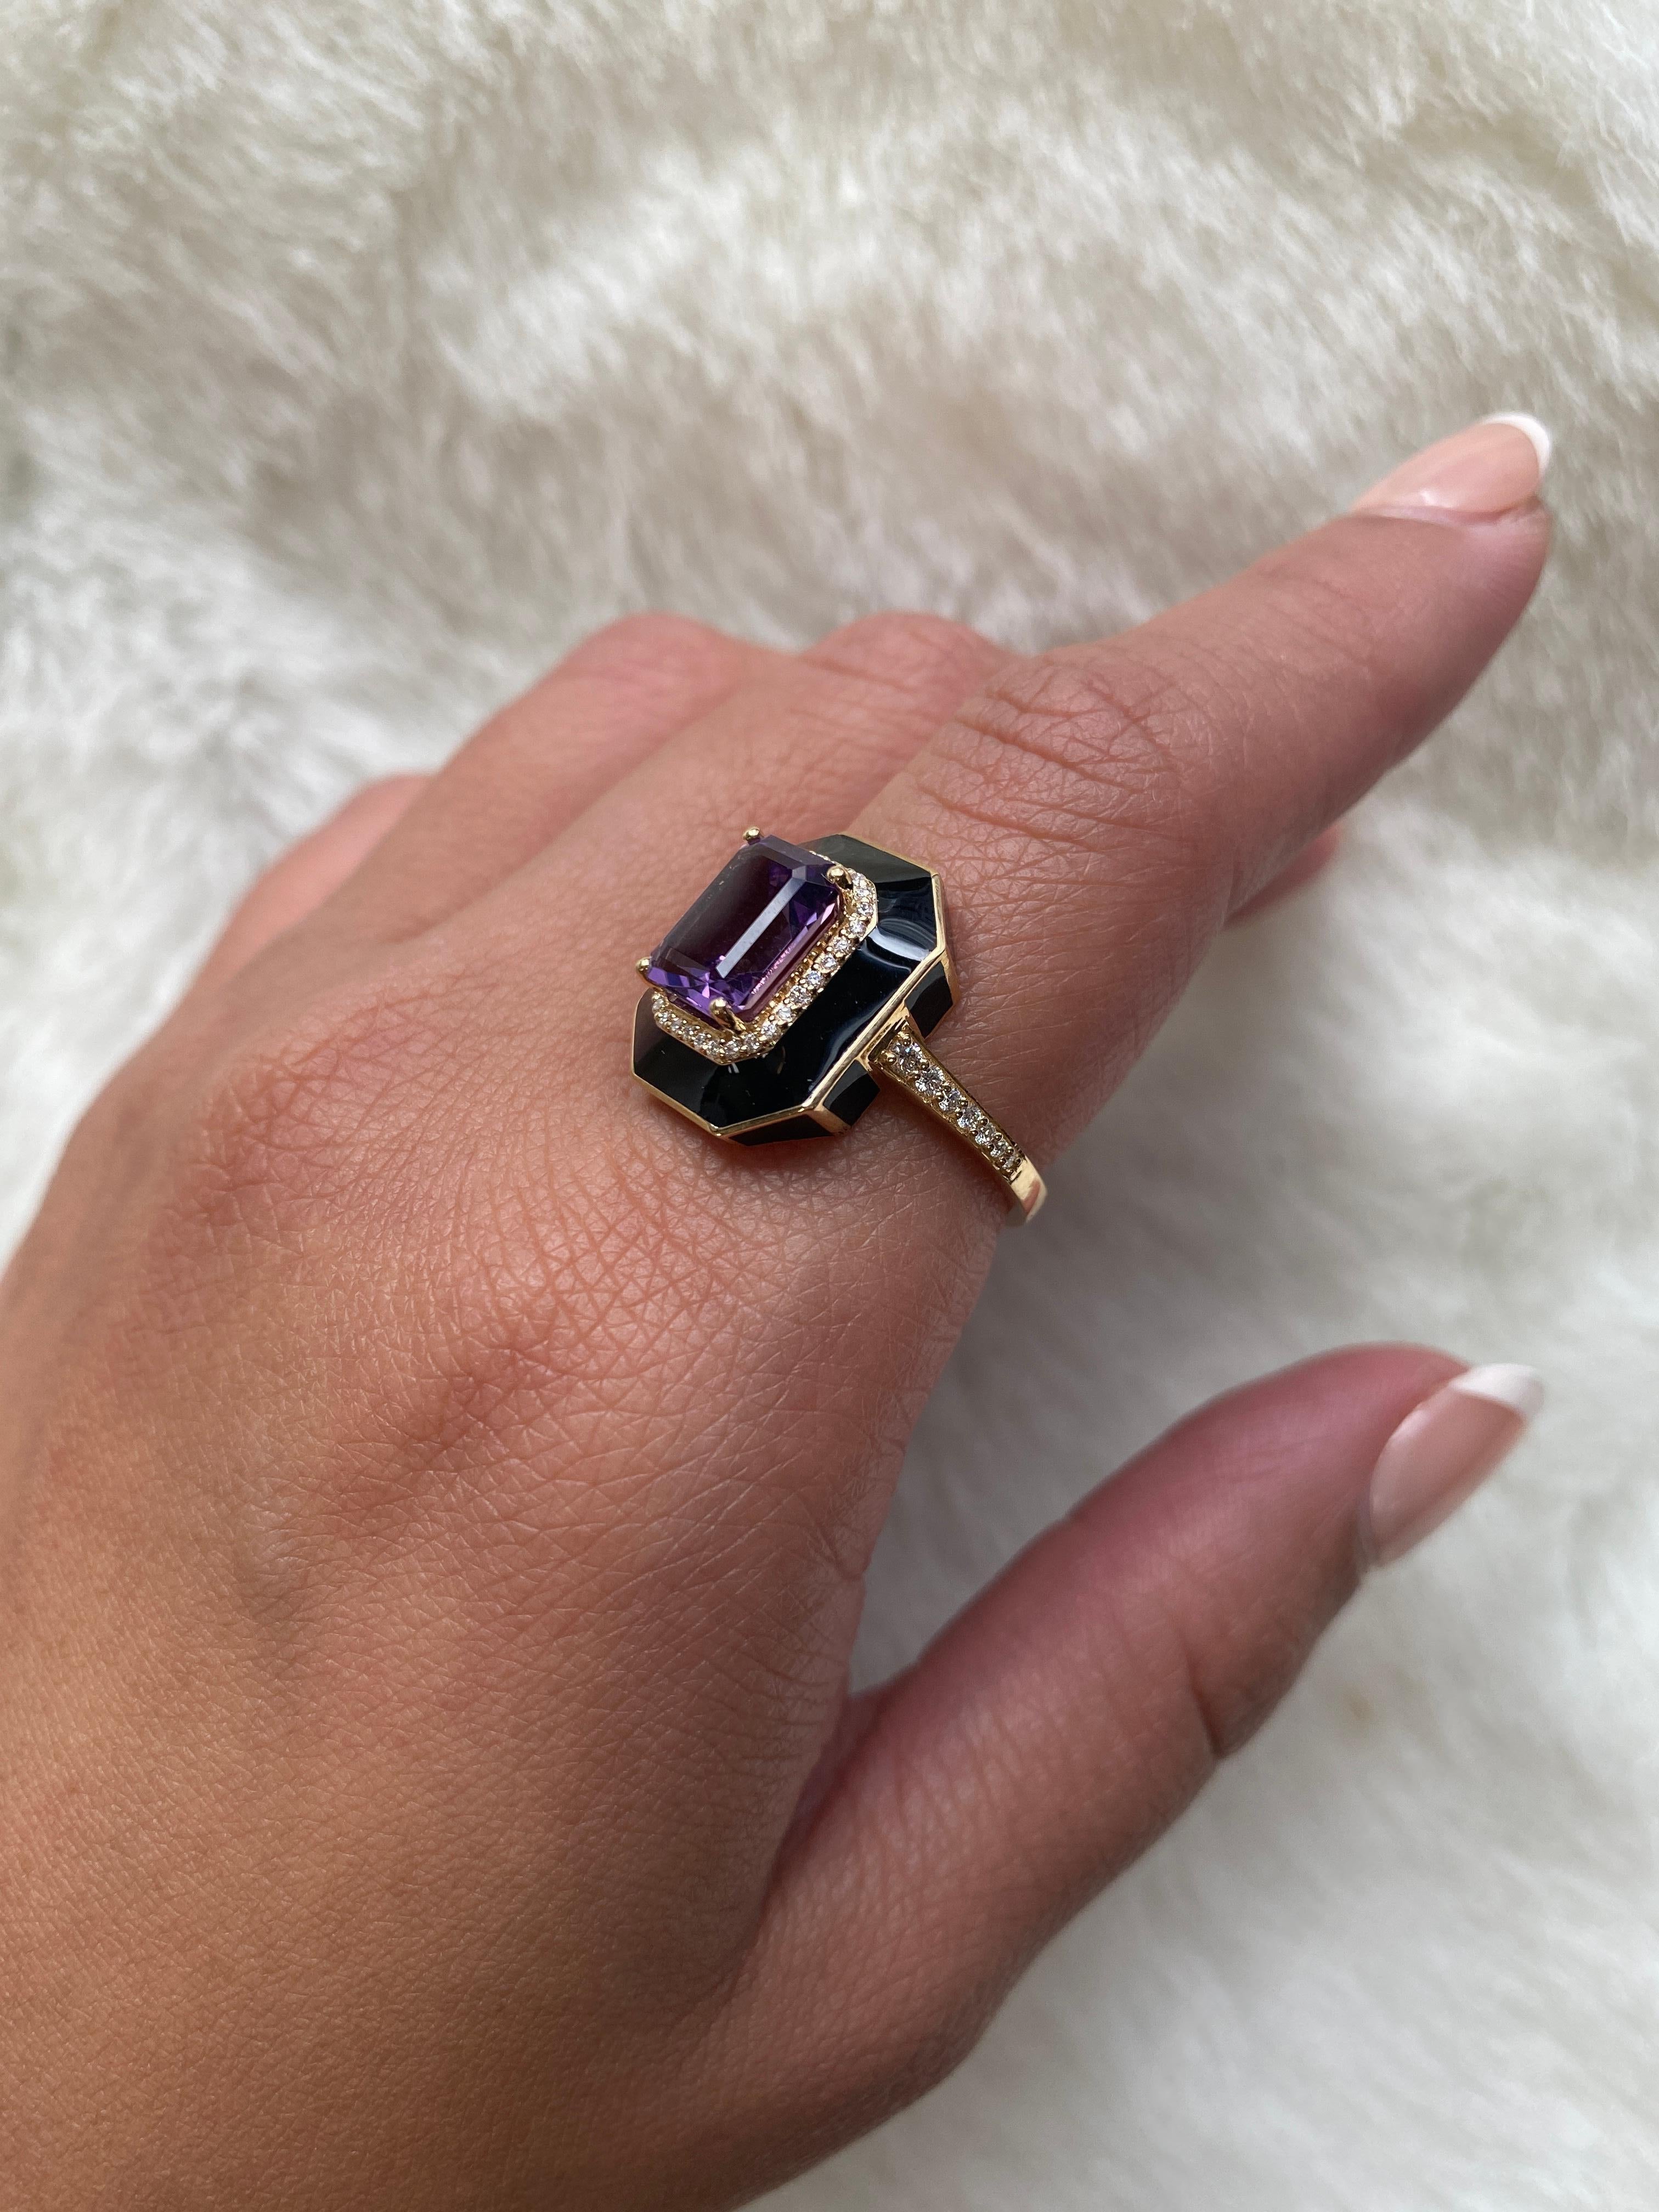 Amethyst Emerald Cut Ring with Diamonds and Black Enamel in 18K Yellow Gold, from 'Queen' Collection. Our Queen Collection was inspired by royalty, but with a modern twist. The combination of enamel and Amethyst represents power, richness and